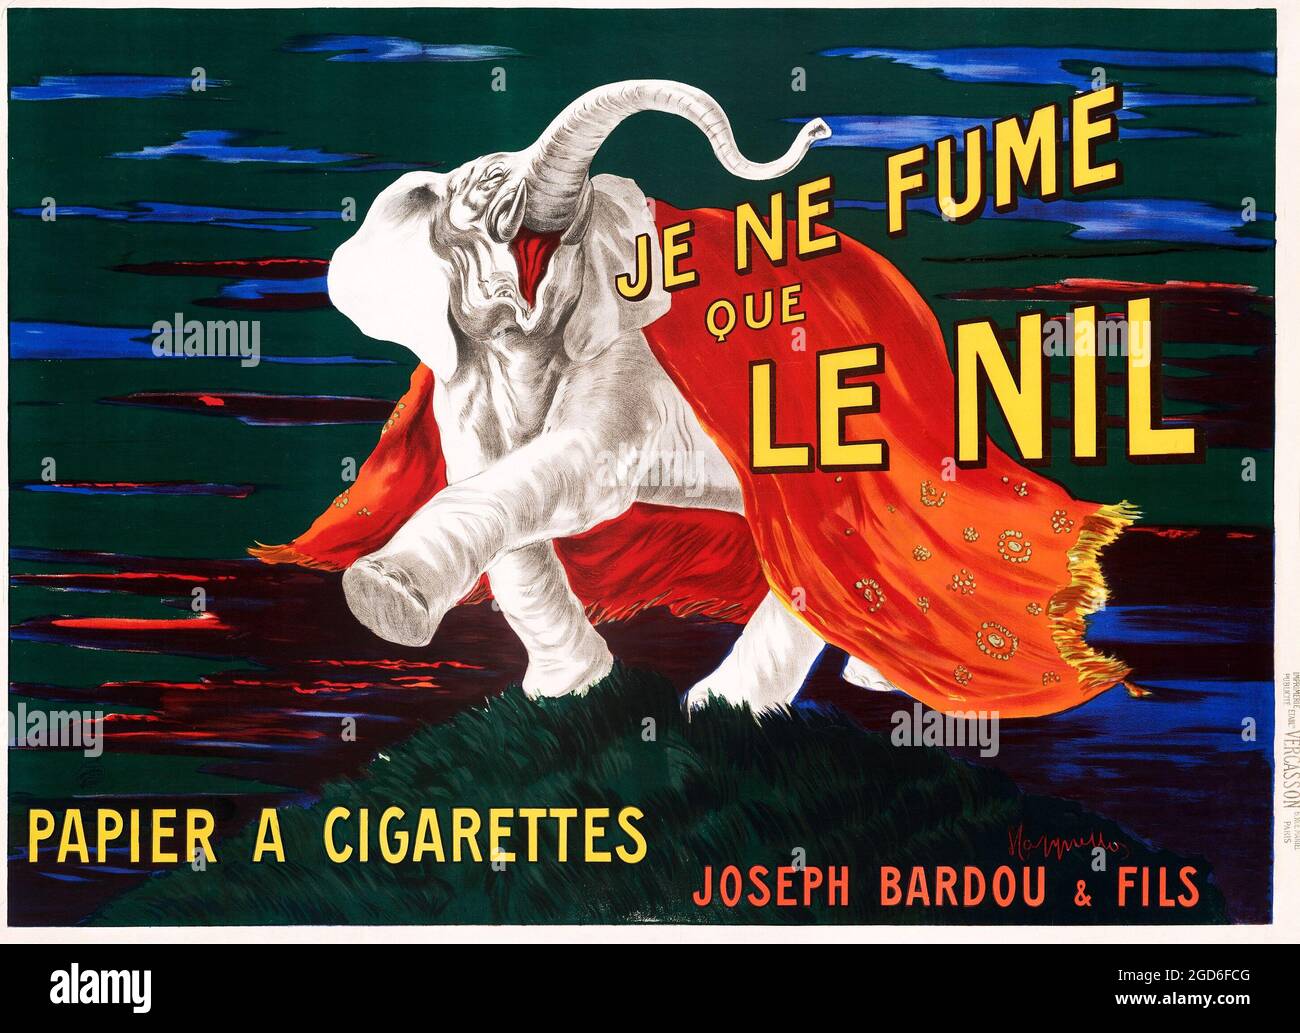 Old and vintage advertisement / poster. Leonetto Cappiello – Je Ne Fume Que Le Nil, 1912 poster. Cigarette paper advertisement with a happy Elephant. Stock Photo